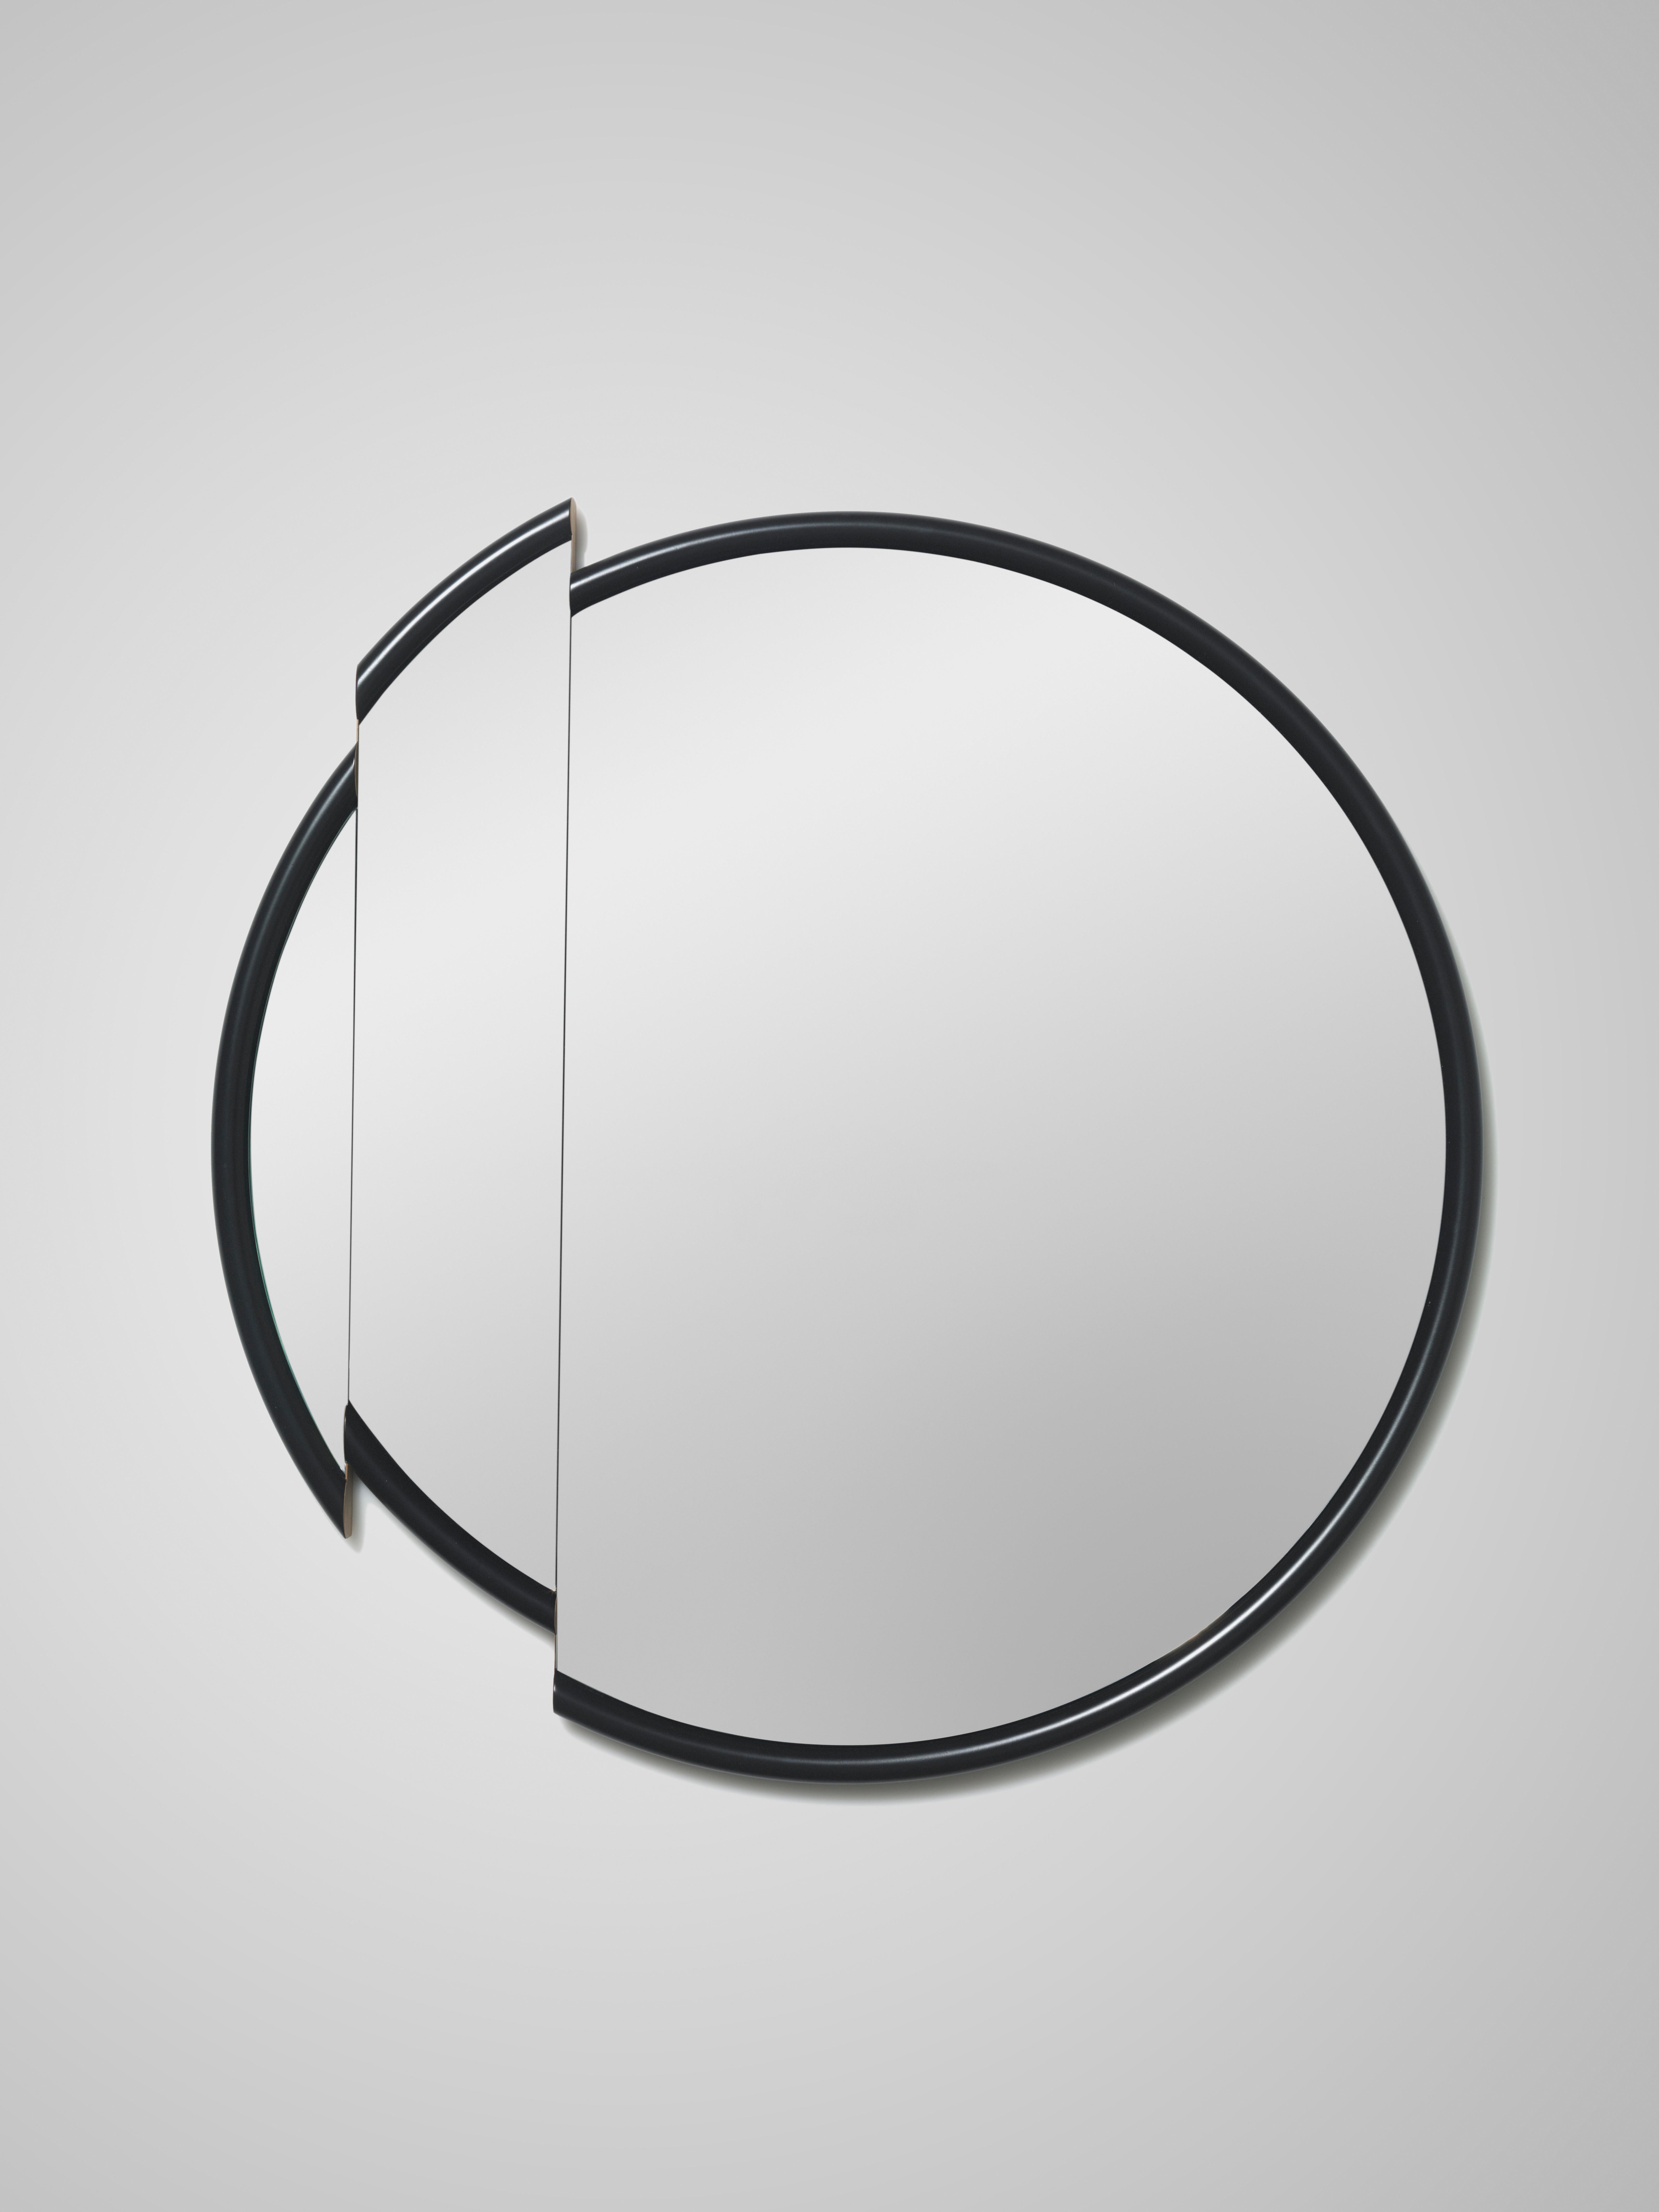 A precision cut slice, shifted from its original position reveals an oak trimmed section of the black frame on Split Mirror.

